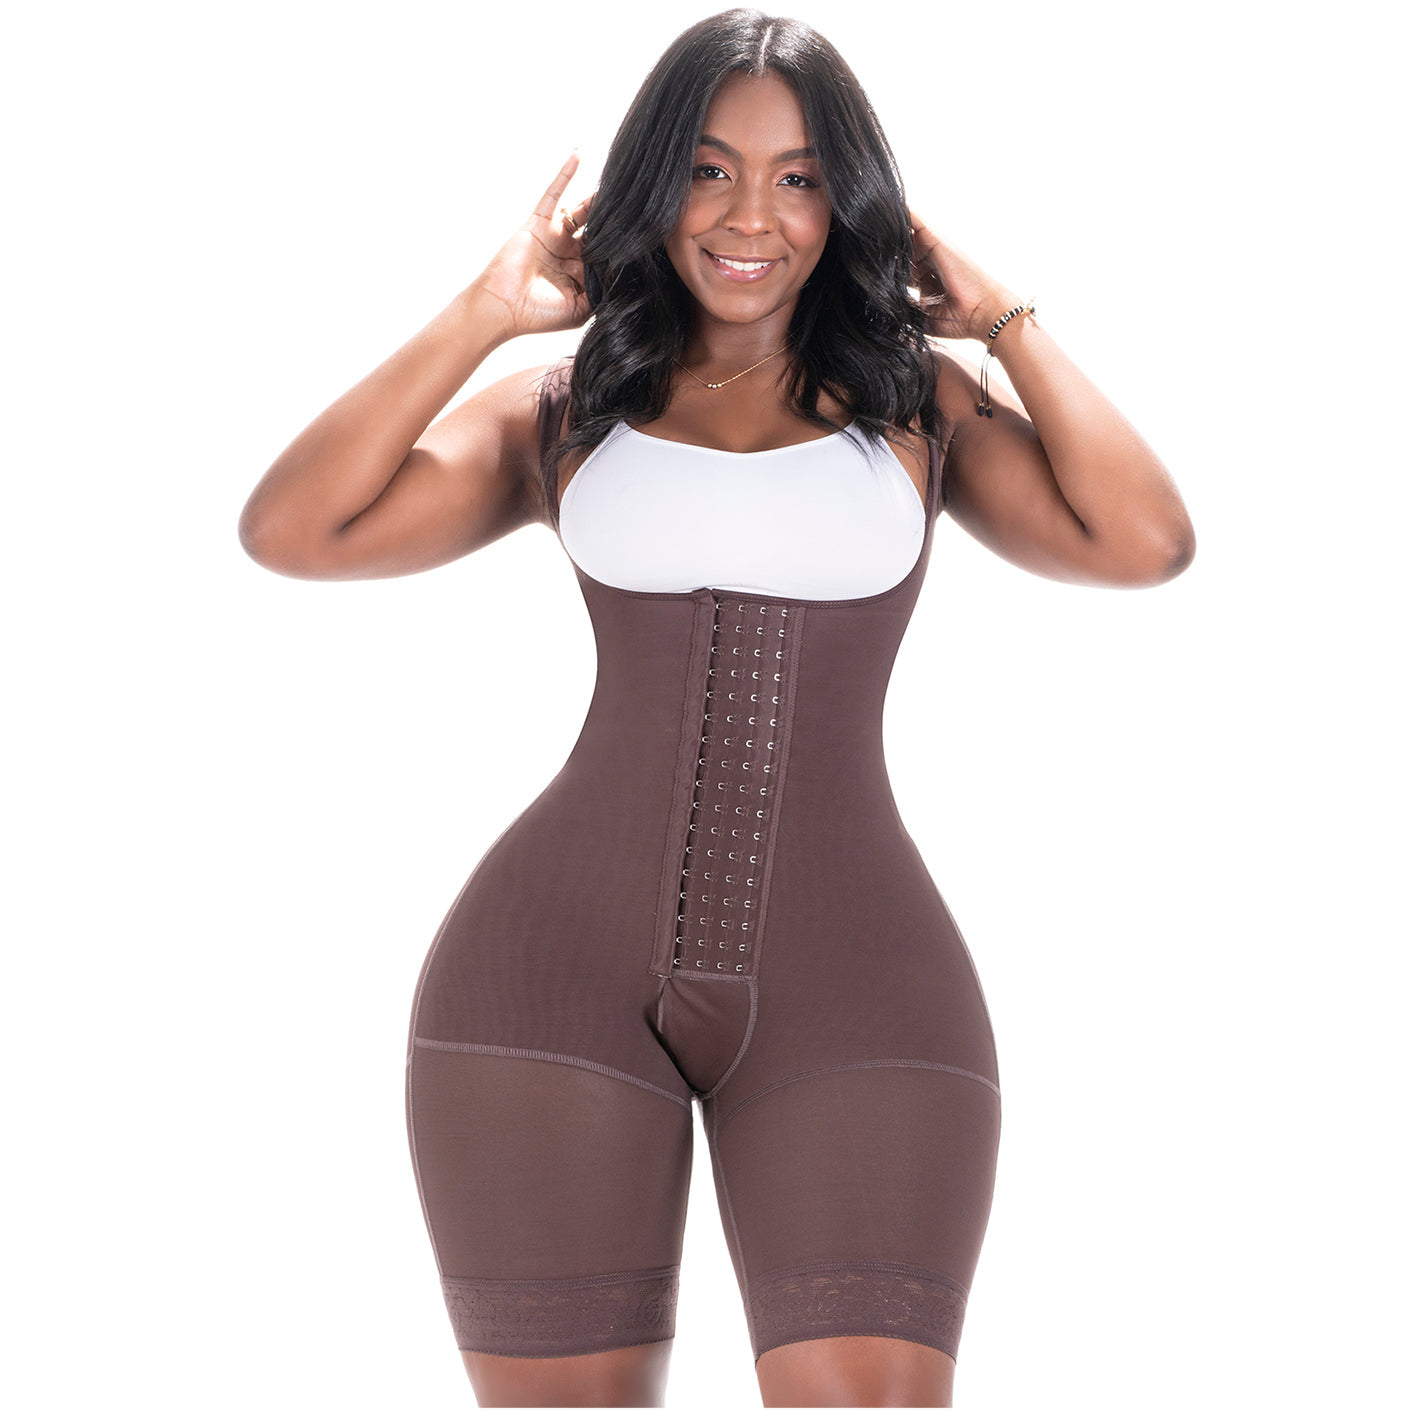 Shapewear & Fajas The Best Faja Fresh and Light Body Shaper for women Full  Coverage Bras Lifts Aligns the Bust With Straps Post Surgical 3-level  adjustable front hook closure Back Support Improves